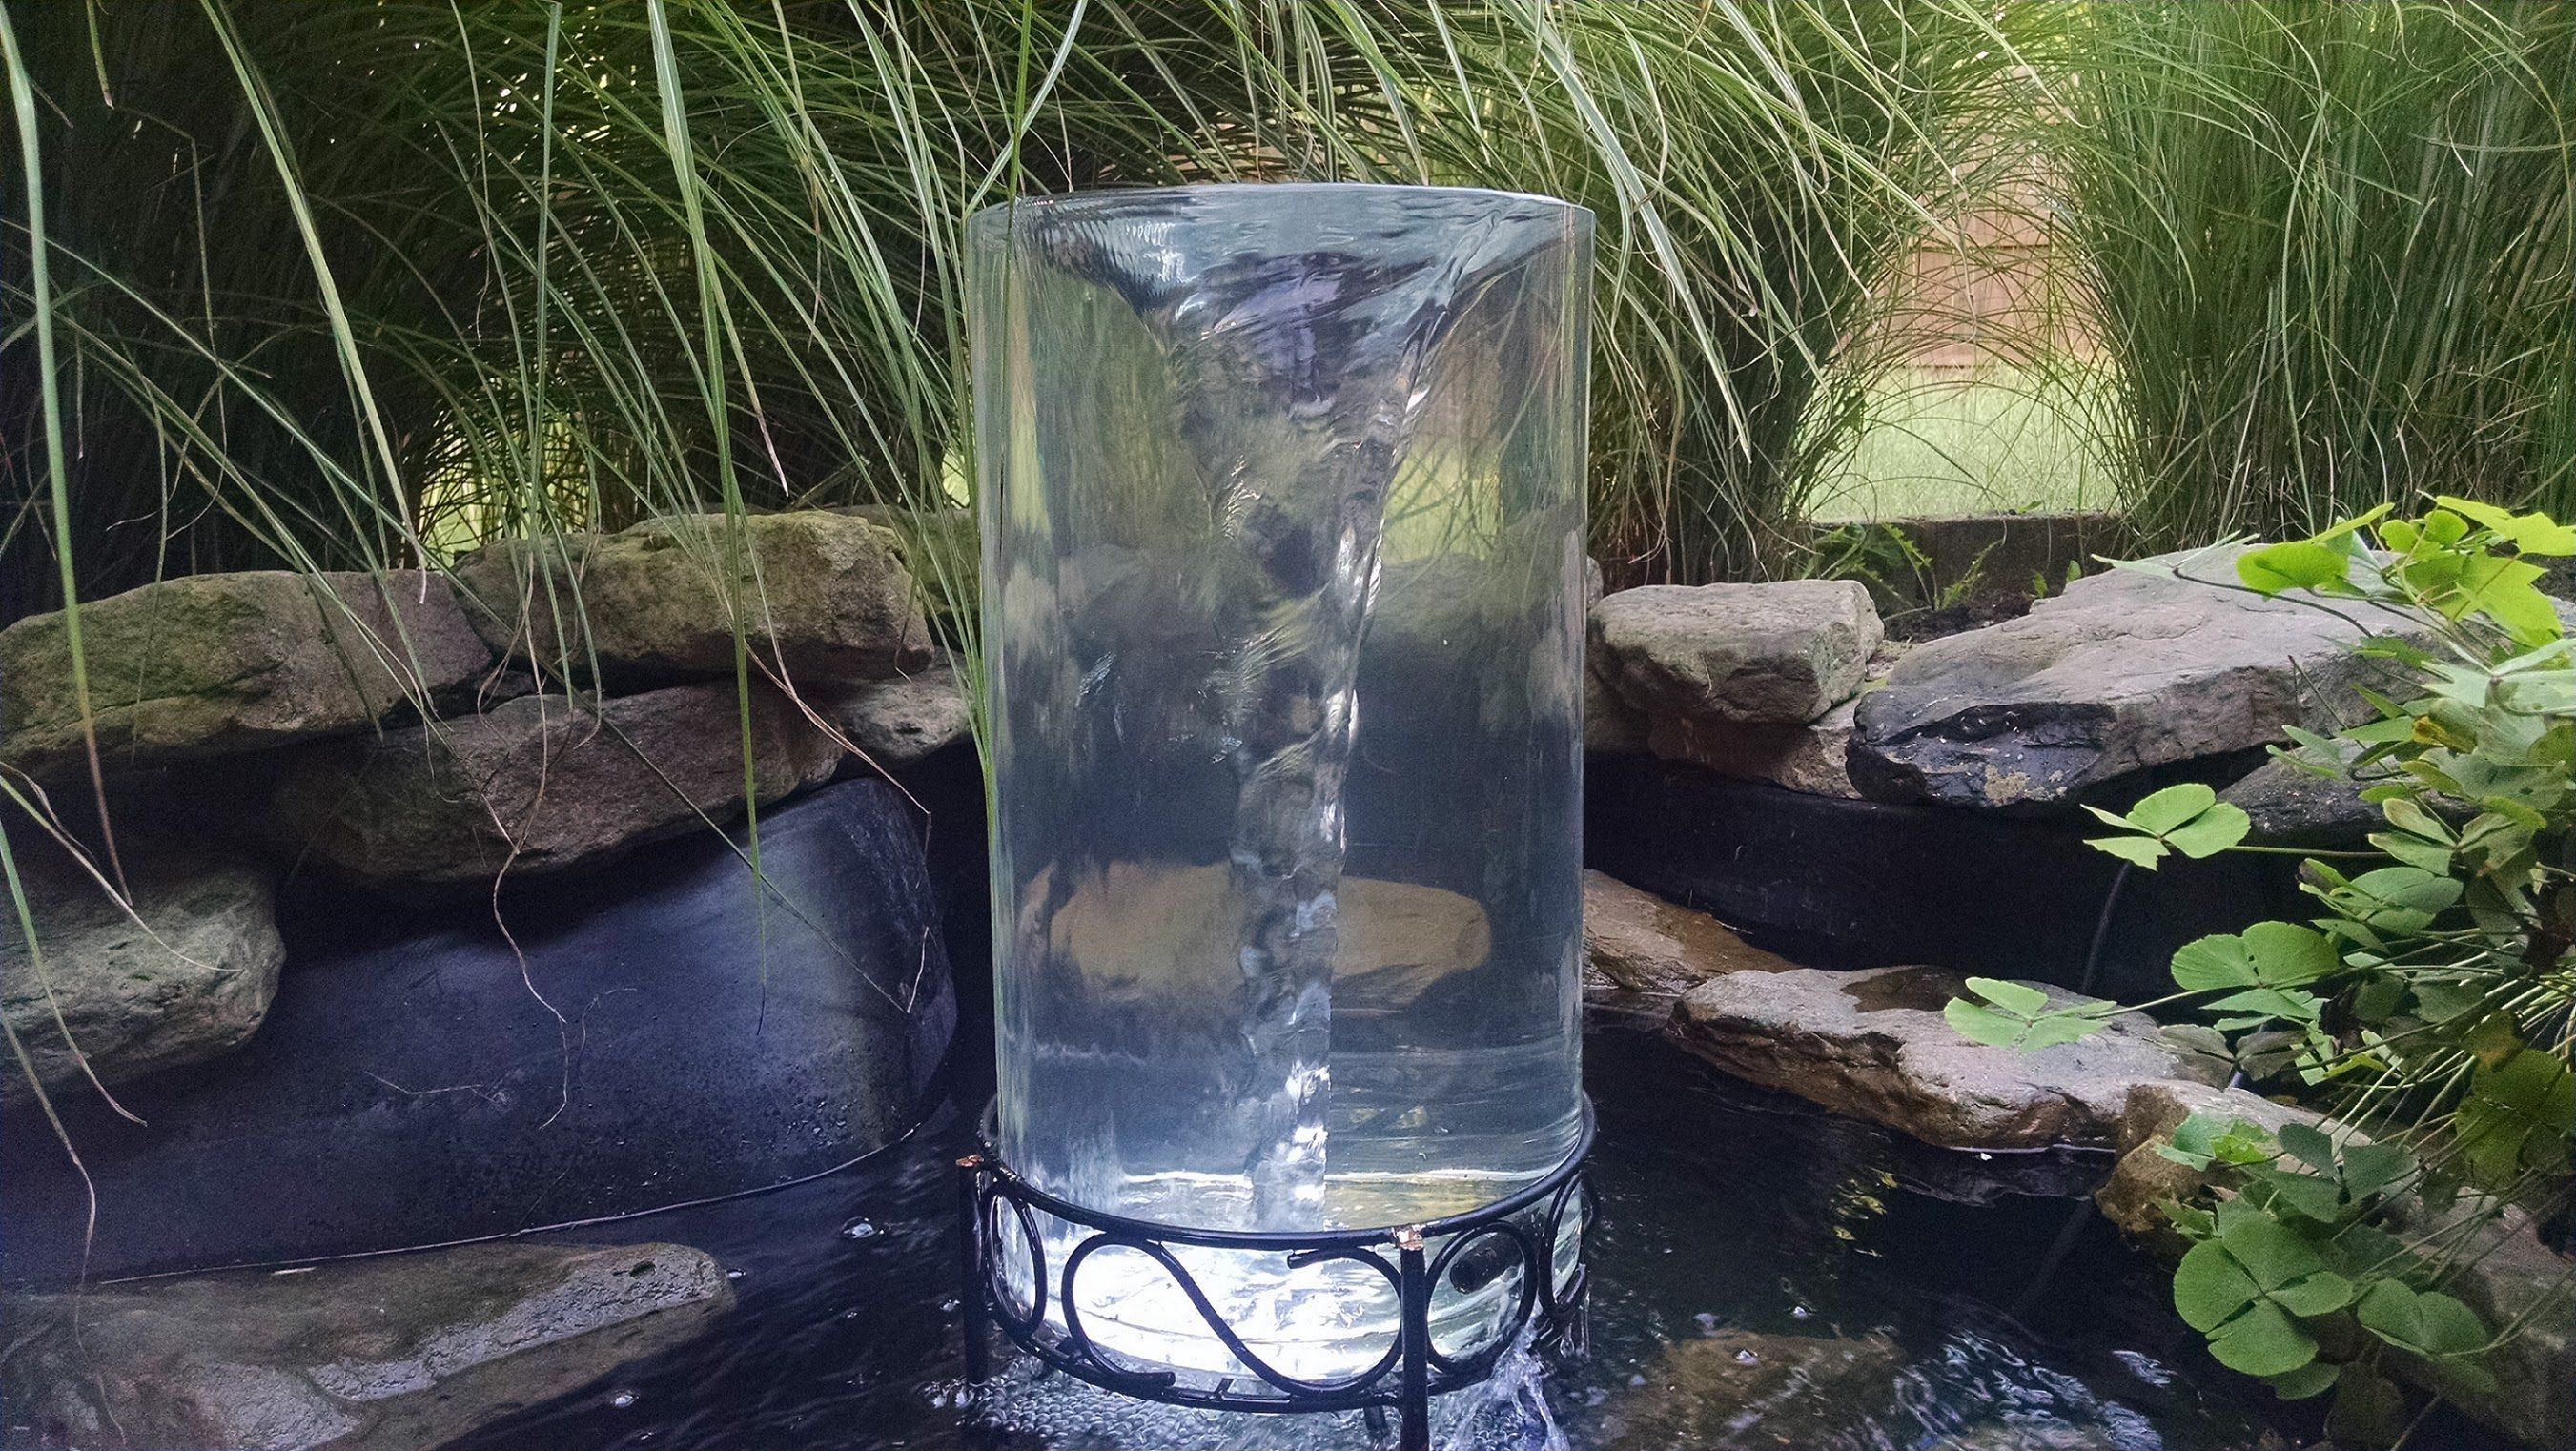 how to make a vase water fountain of step by step process for making your own vortex water feature its pertaining to step by step process for making your own vortex water feature its like a water tornado